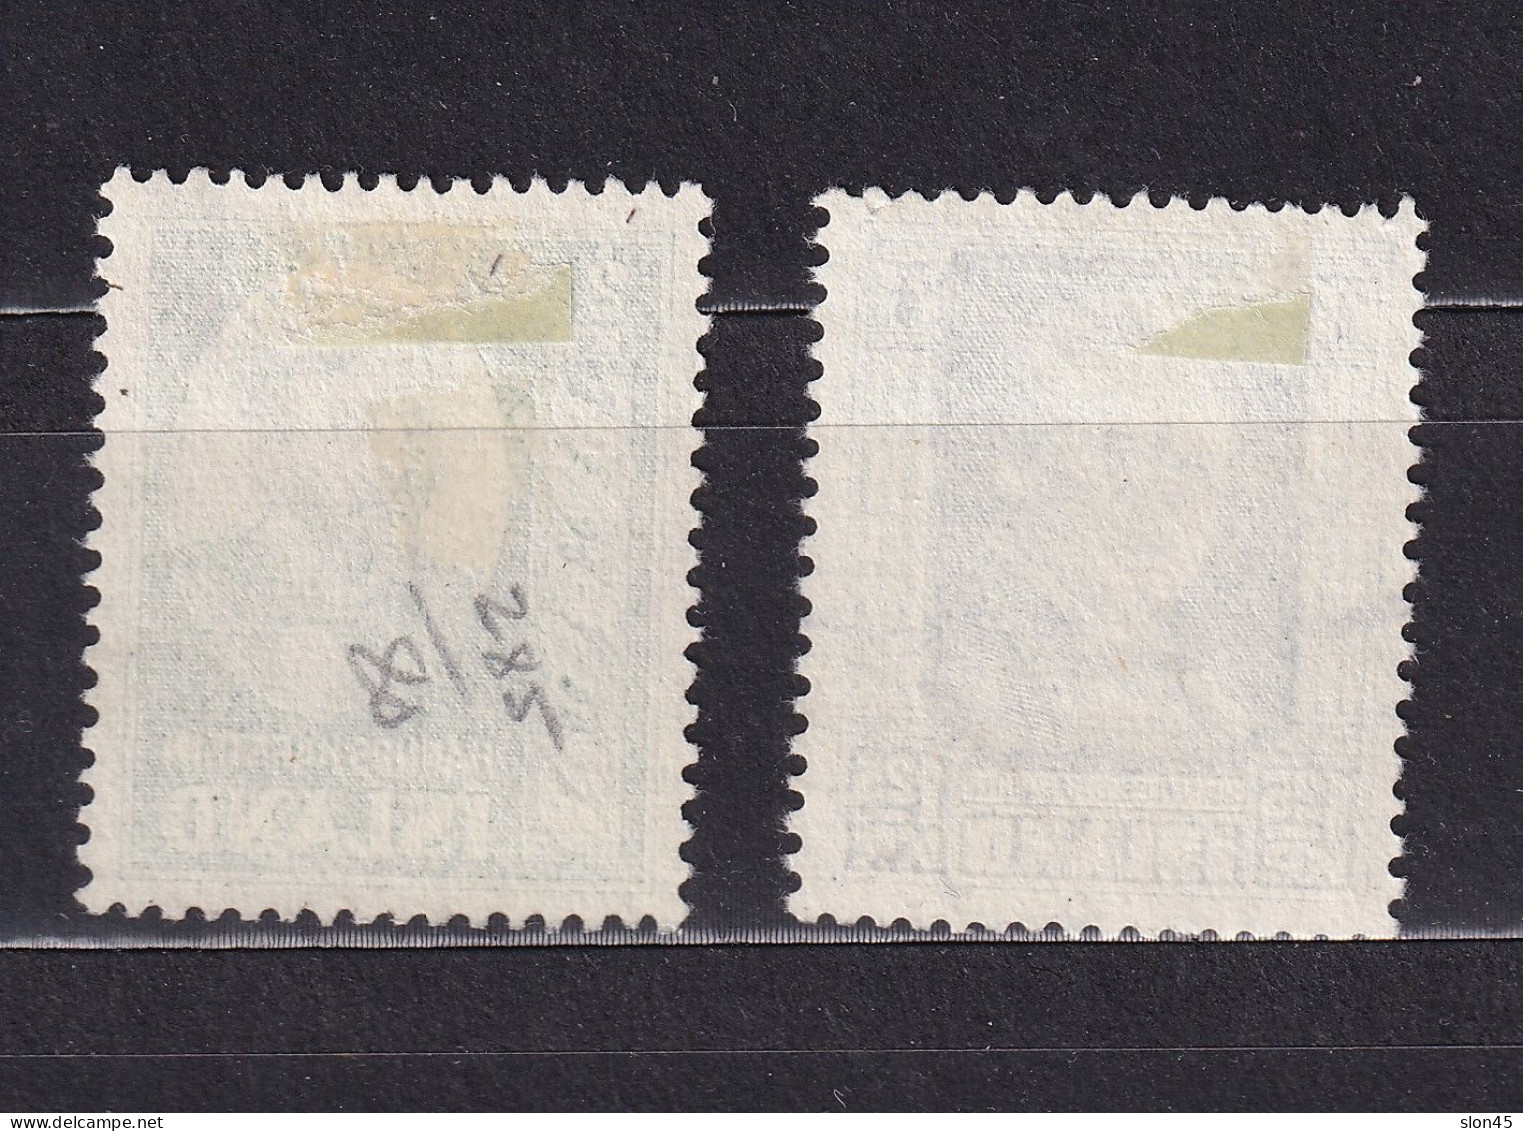 Iceland 1954 H.Hafstein Used Key Stamp 15675 - Used Stamps